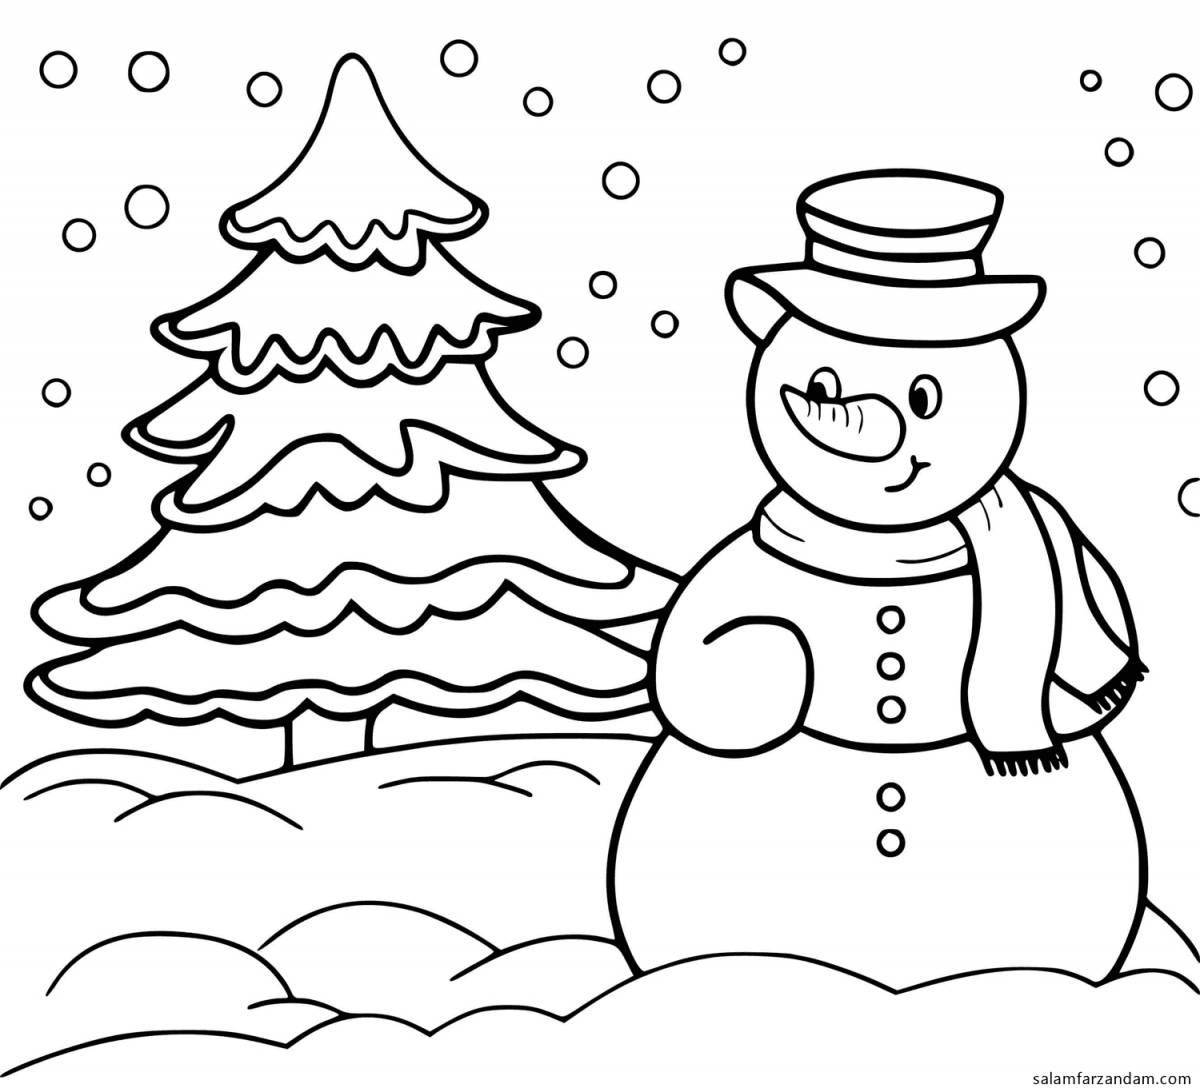 Colorful winter tree coloring page